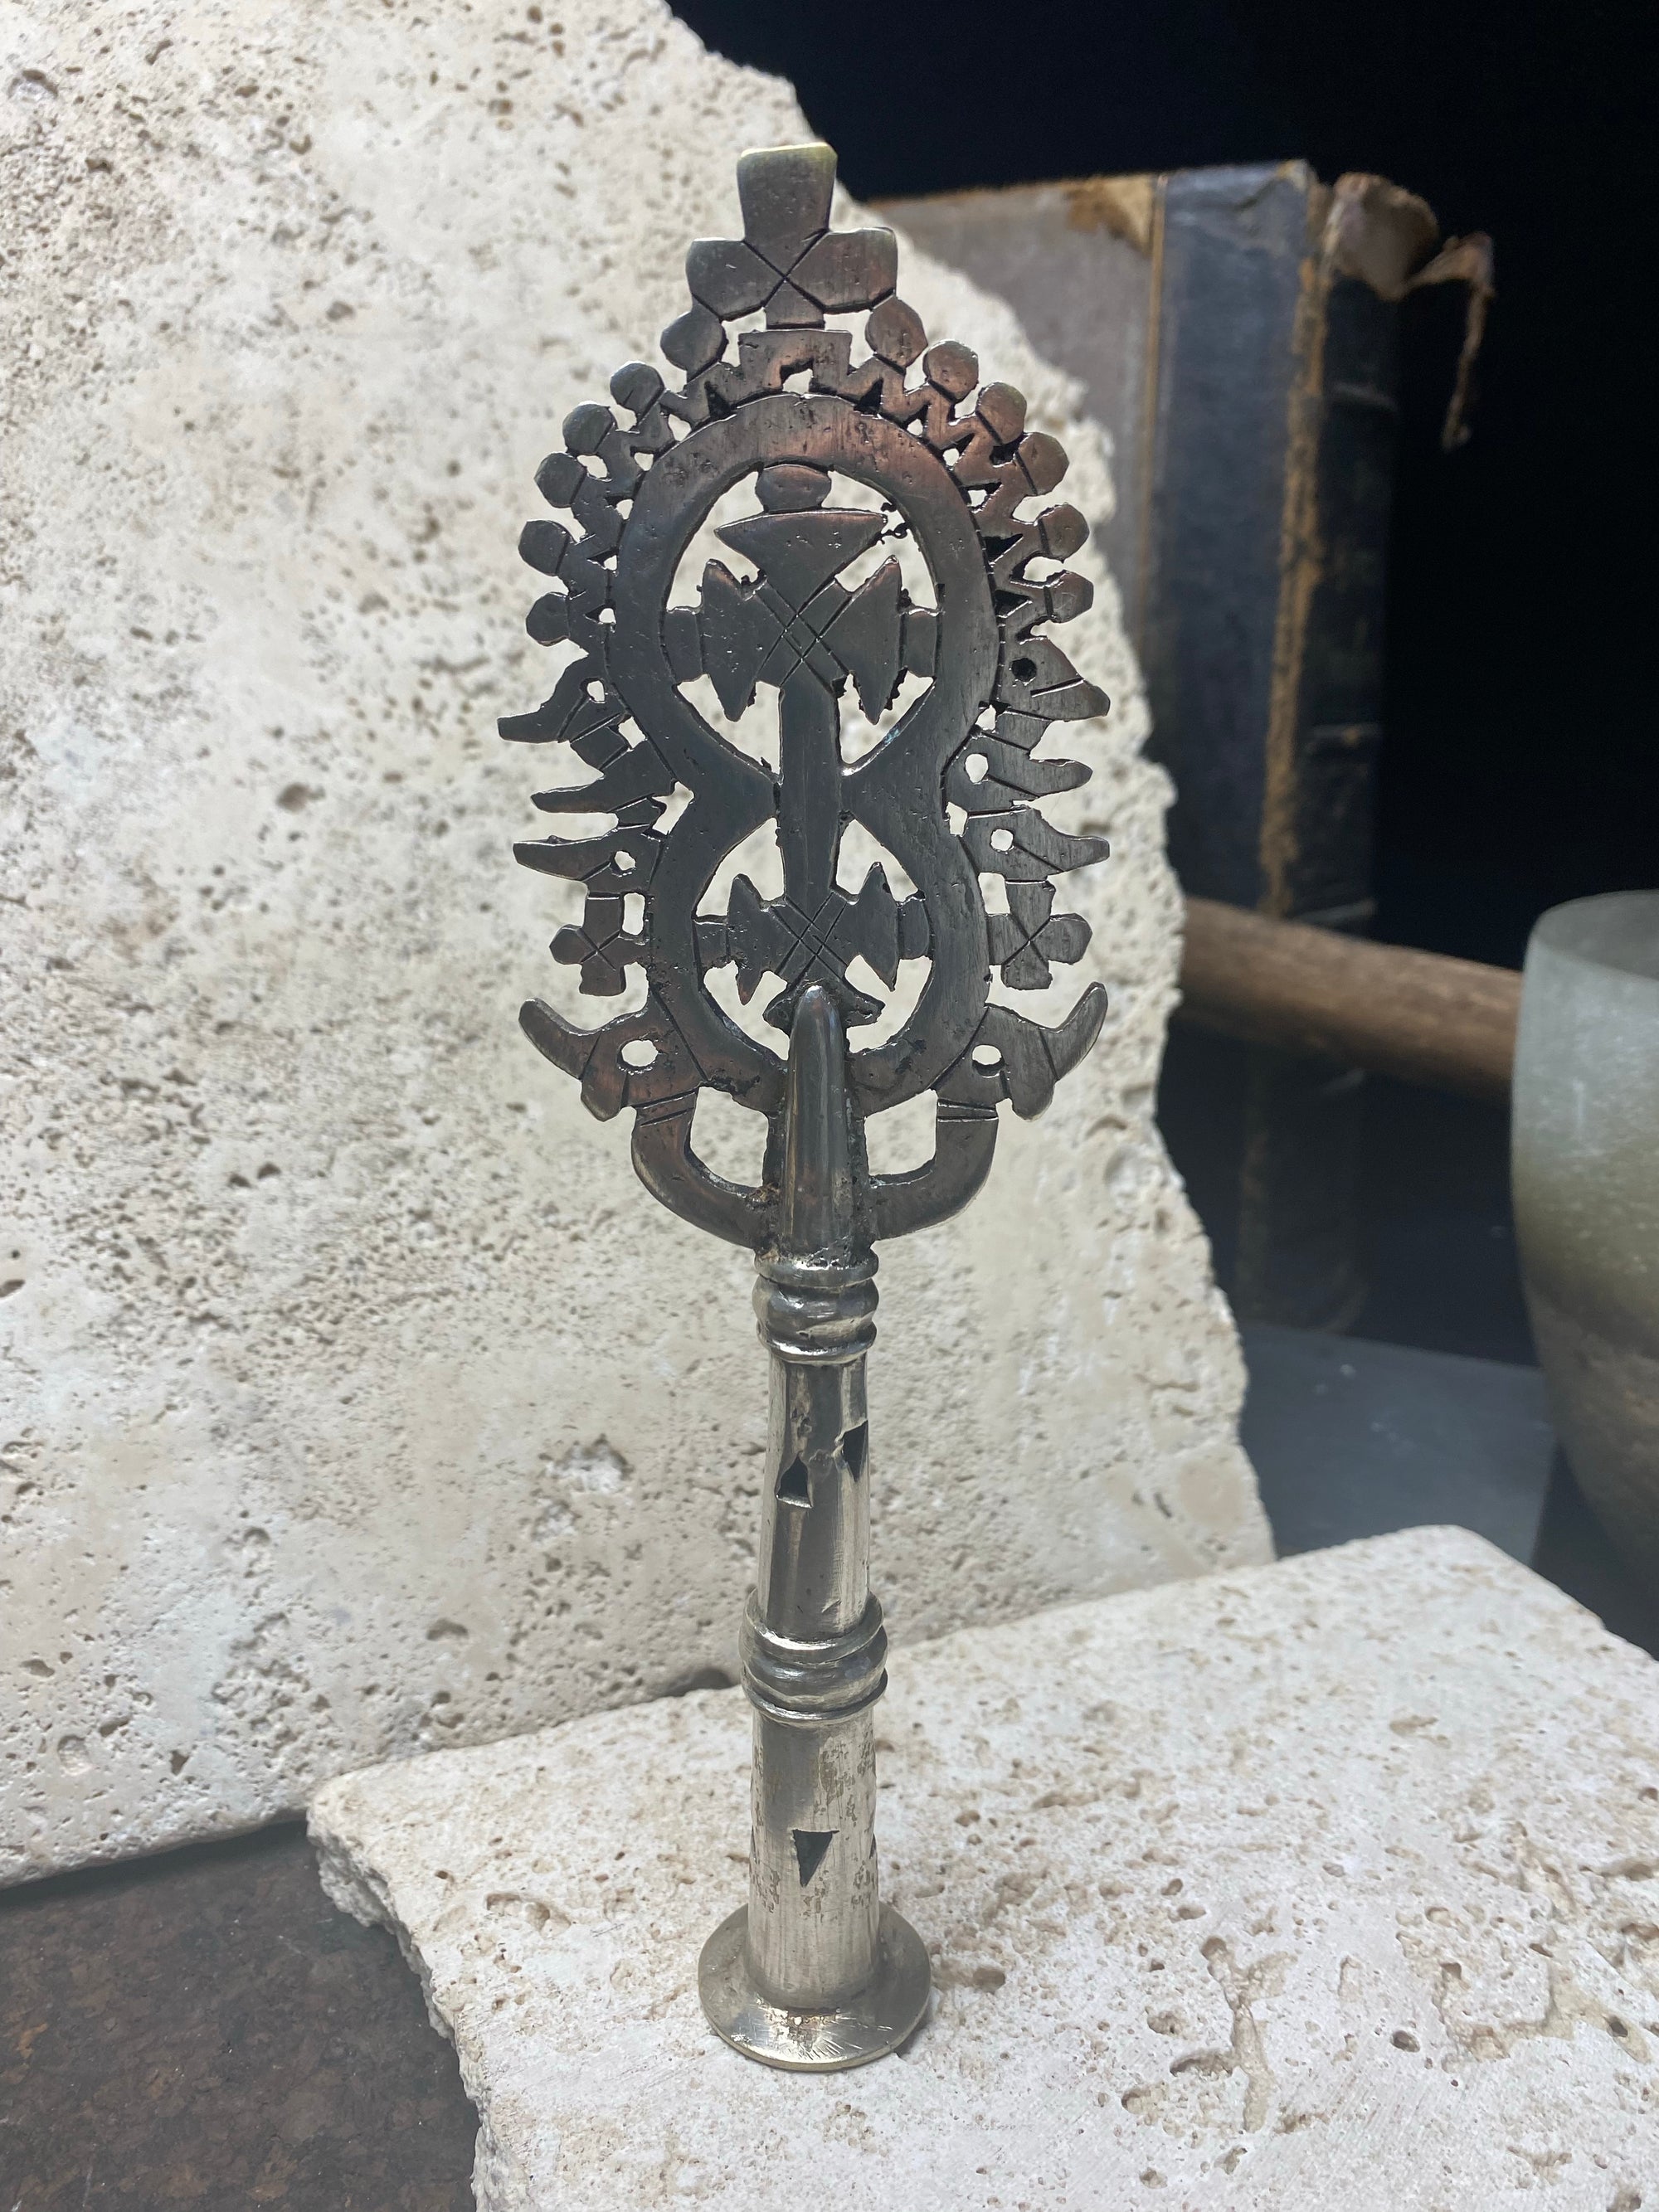 Two small Ethiopian processional crosses, hand cast by the lost wax method. Made from white metal and designed to be displayed and paraded in religious processions on top of wooden staffs, these are used vintage pieces dating to the 1970's, and are from the Lalibela region of northern Ethiopia. Height approximately 19.5 cm